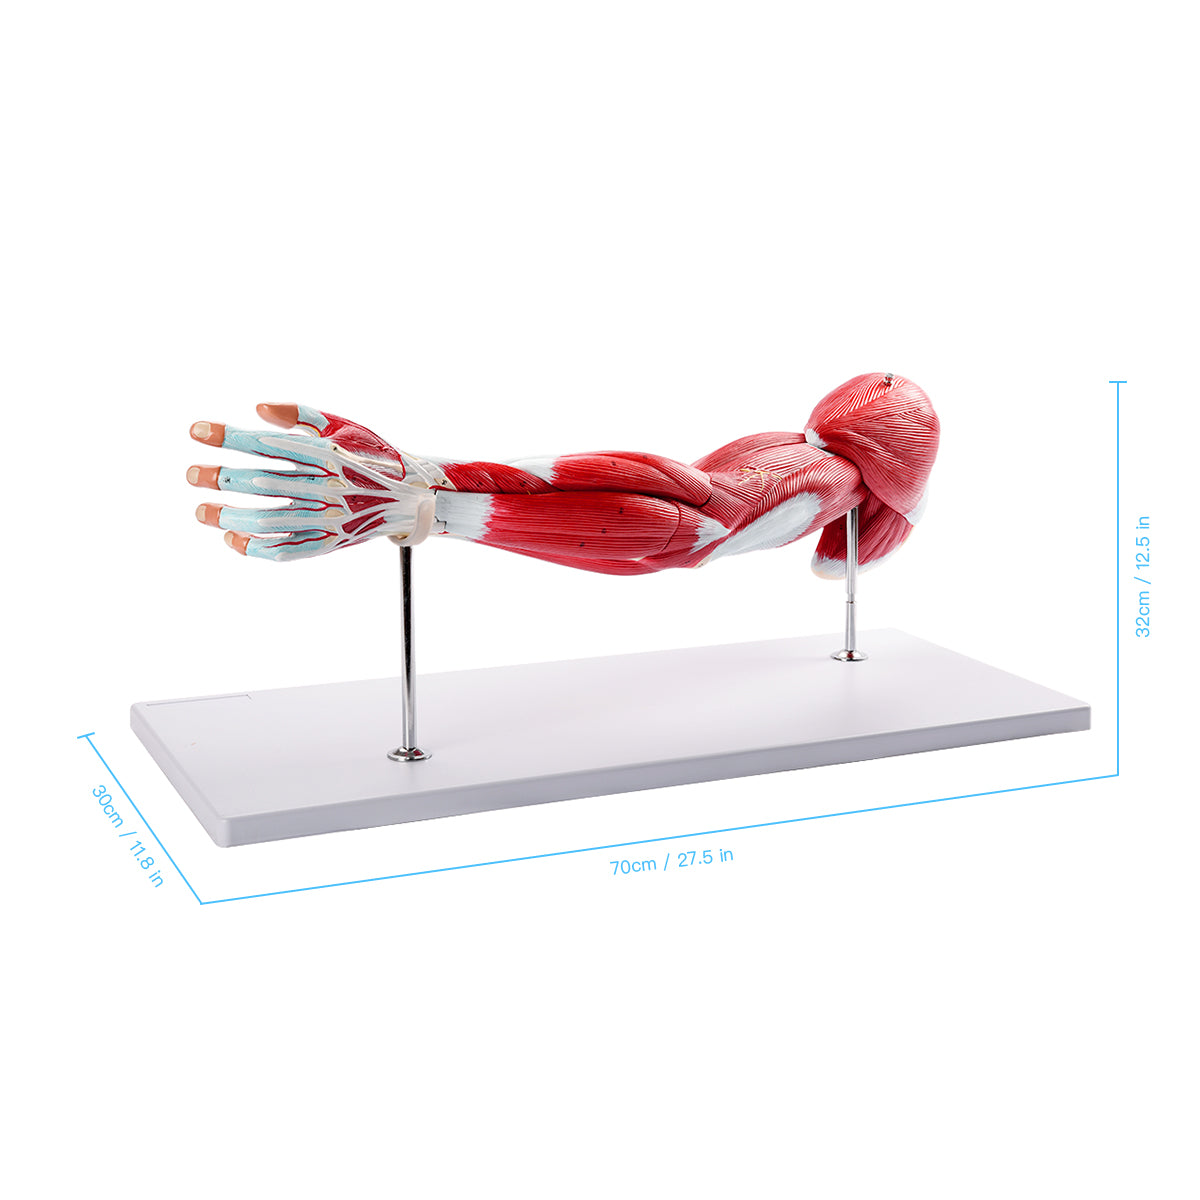 Evotech Scientific Anatomical Muscular Arm Model, Life Size, 7 Parts